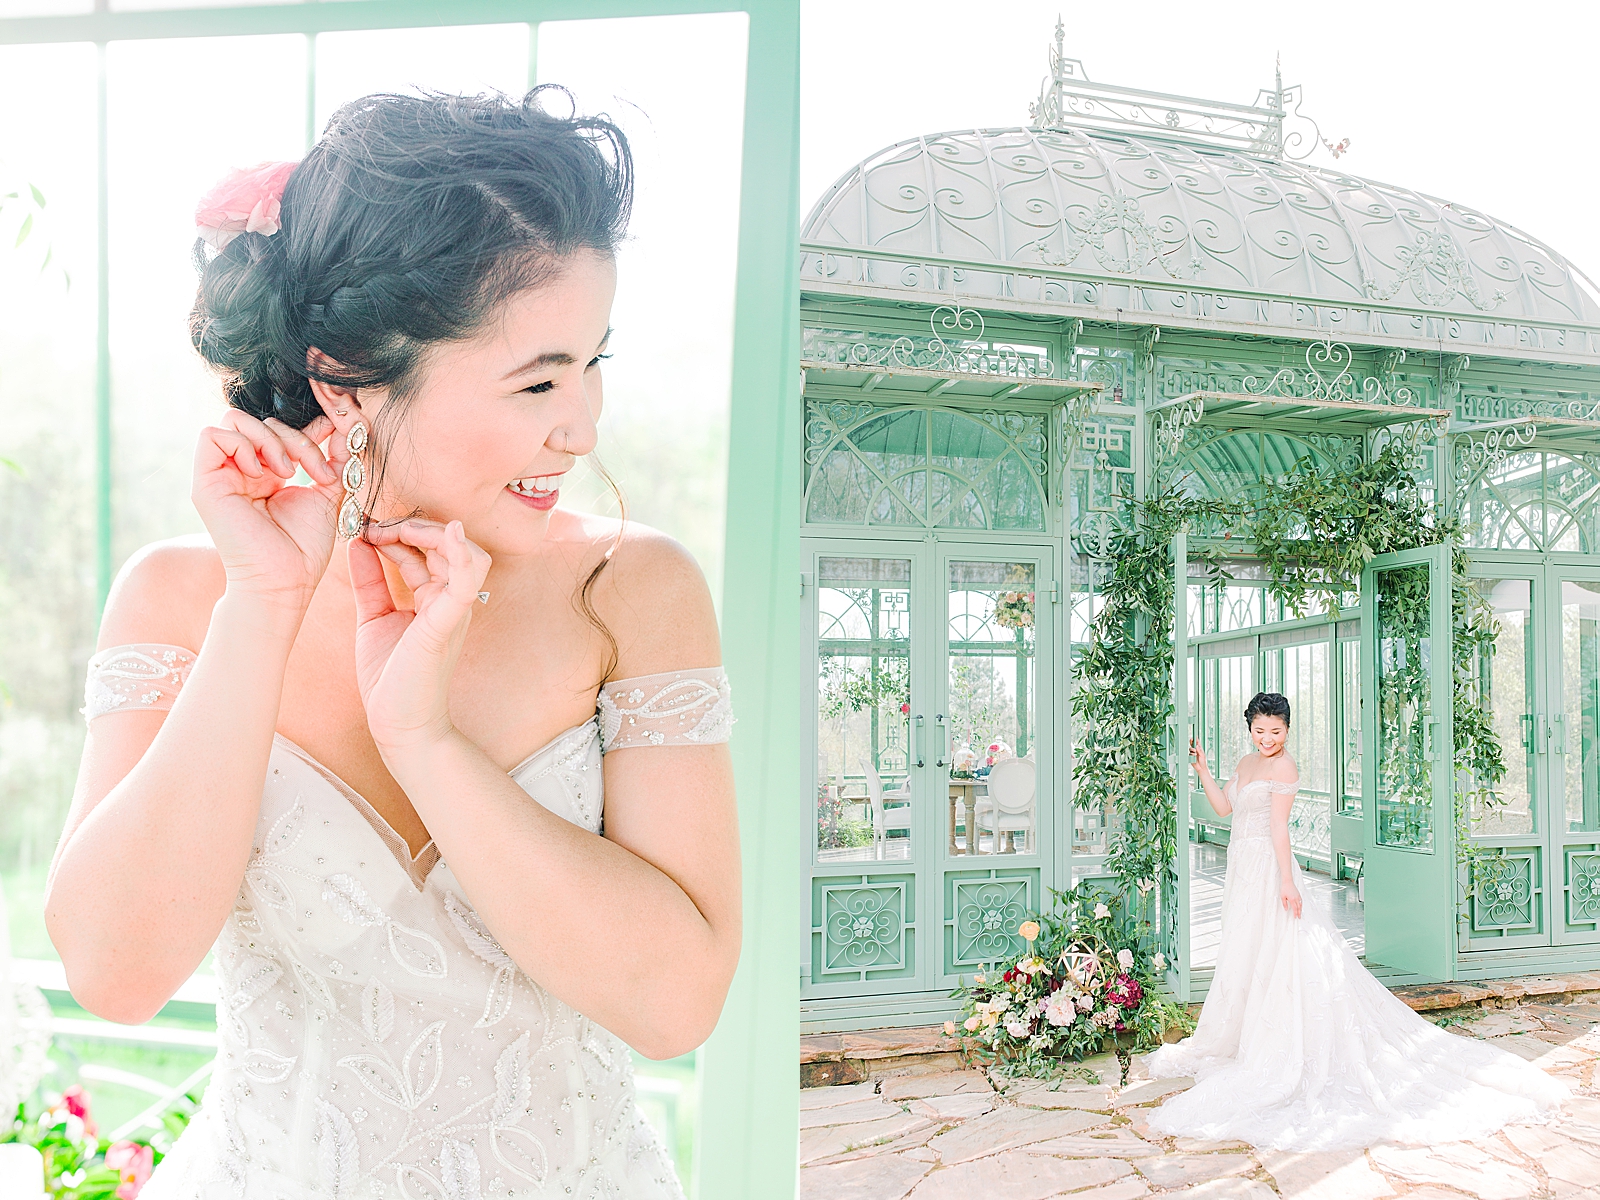 2400 On The River Bridal Session Lily putting on earrings and standing in front of Greenhouse Photos